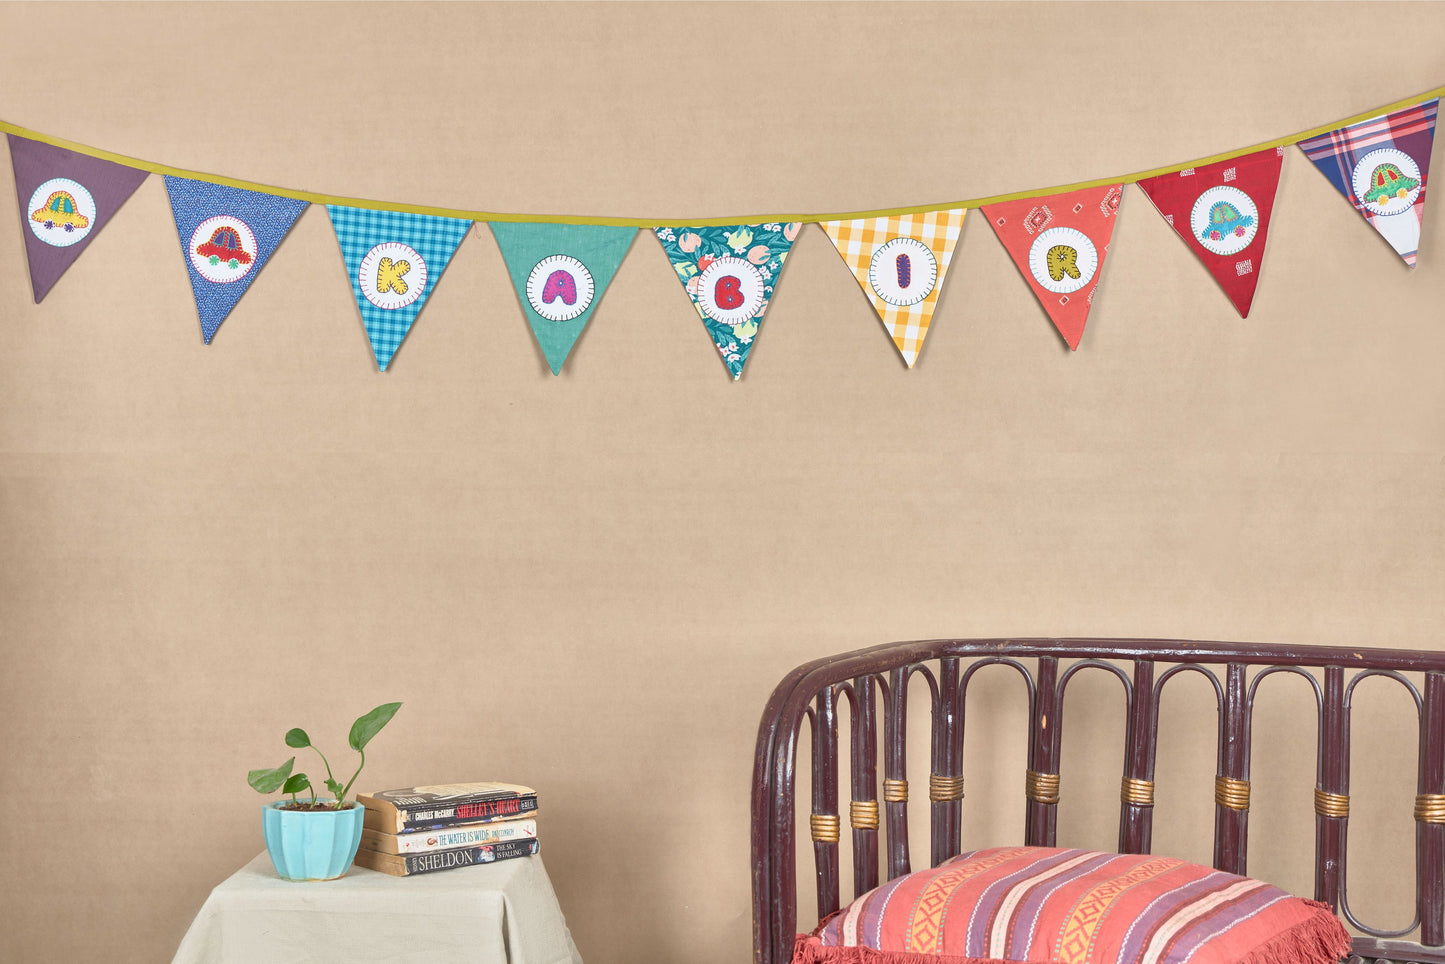 Upcycled Personalized Name Banner with Cars Motifs (Triangle Flag)